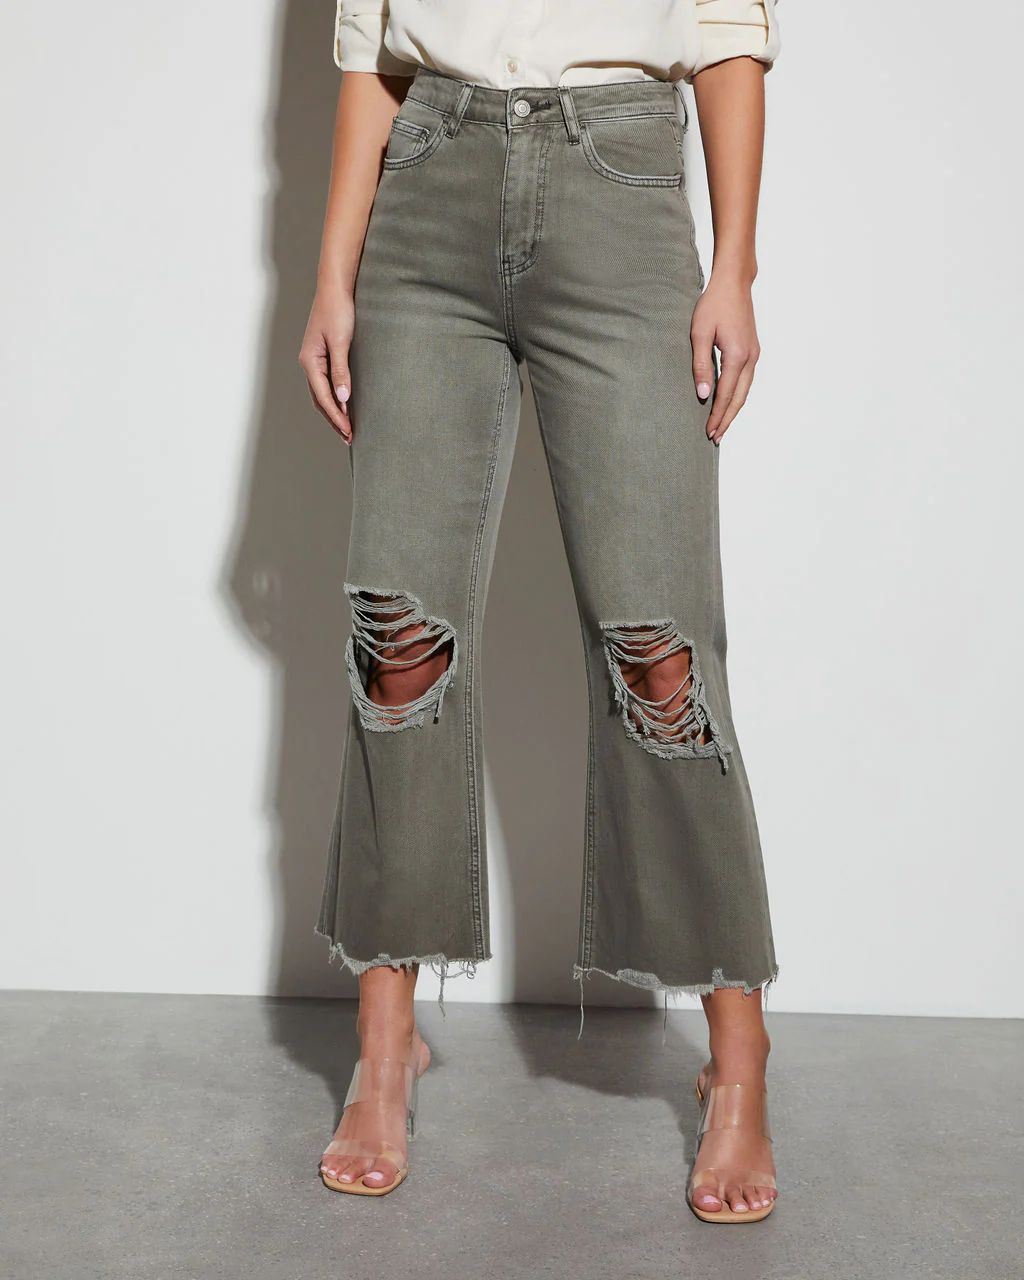 Romani Distressed Crop Jeans | VICI Collection